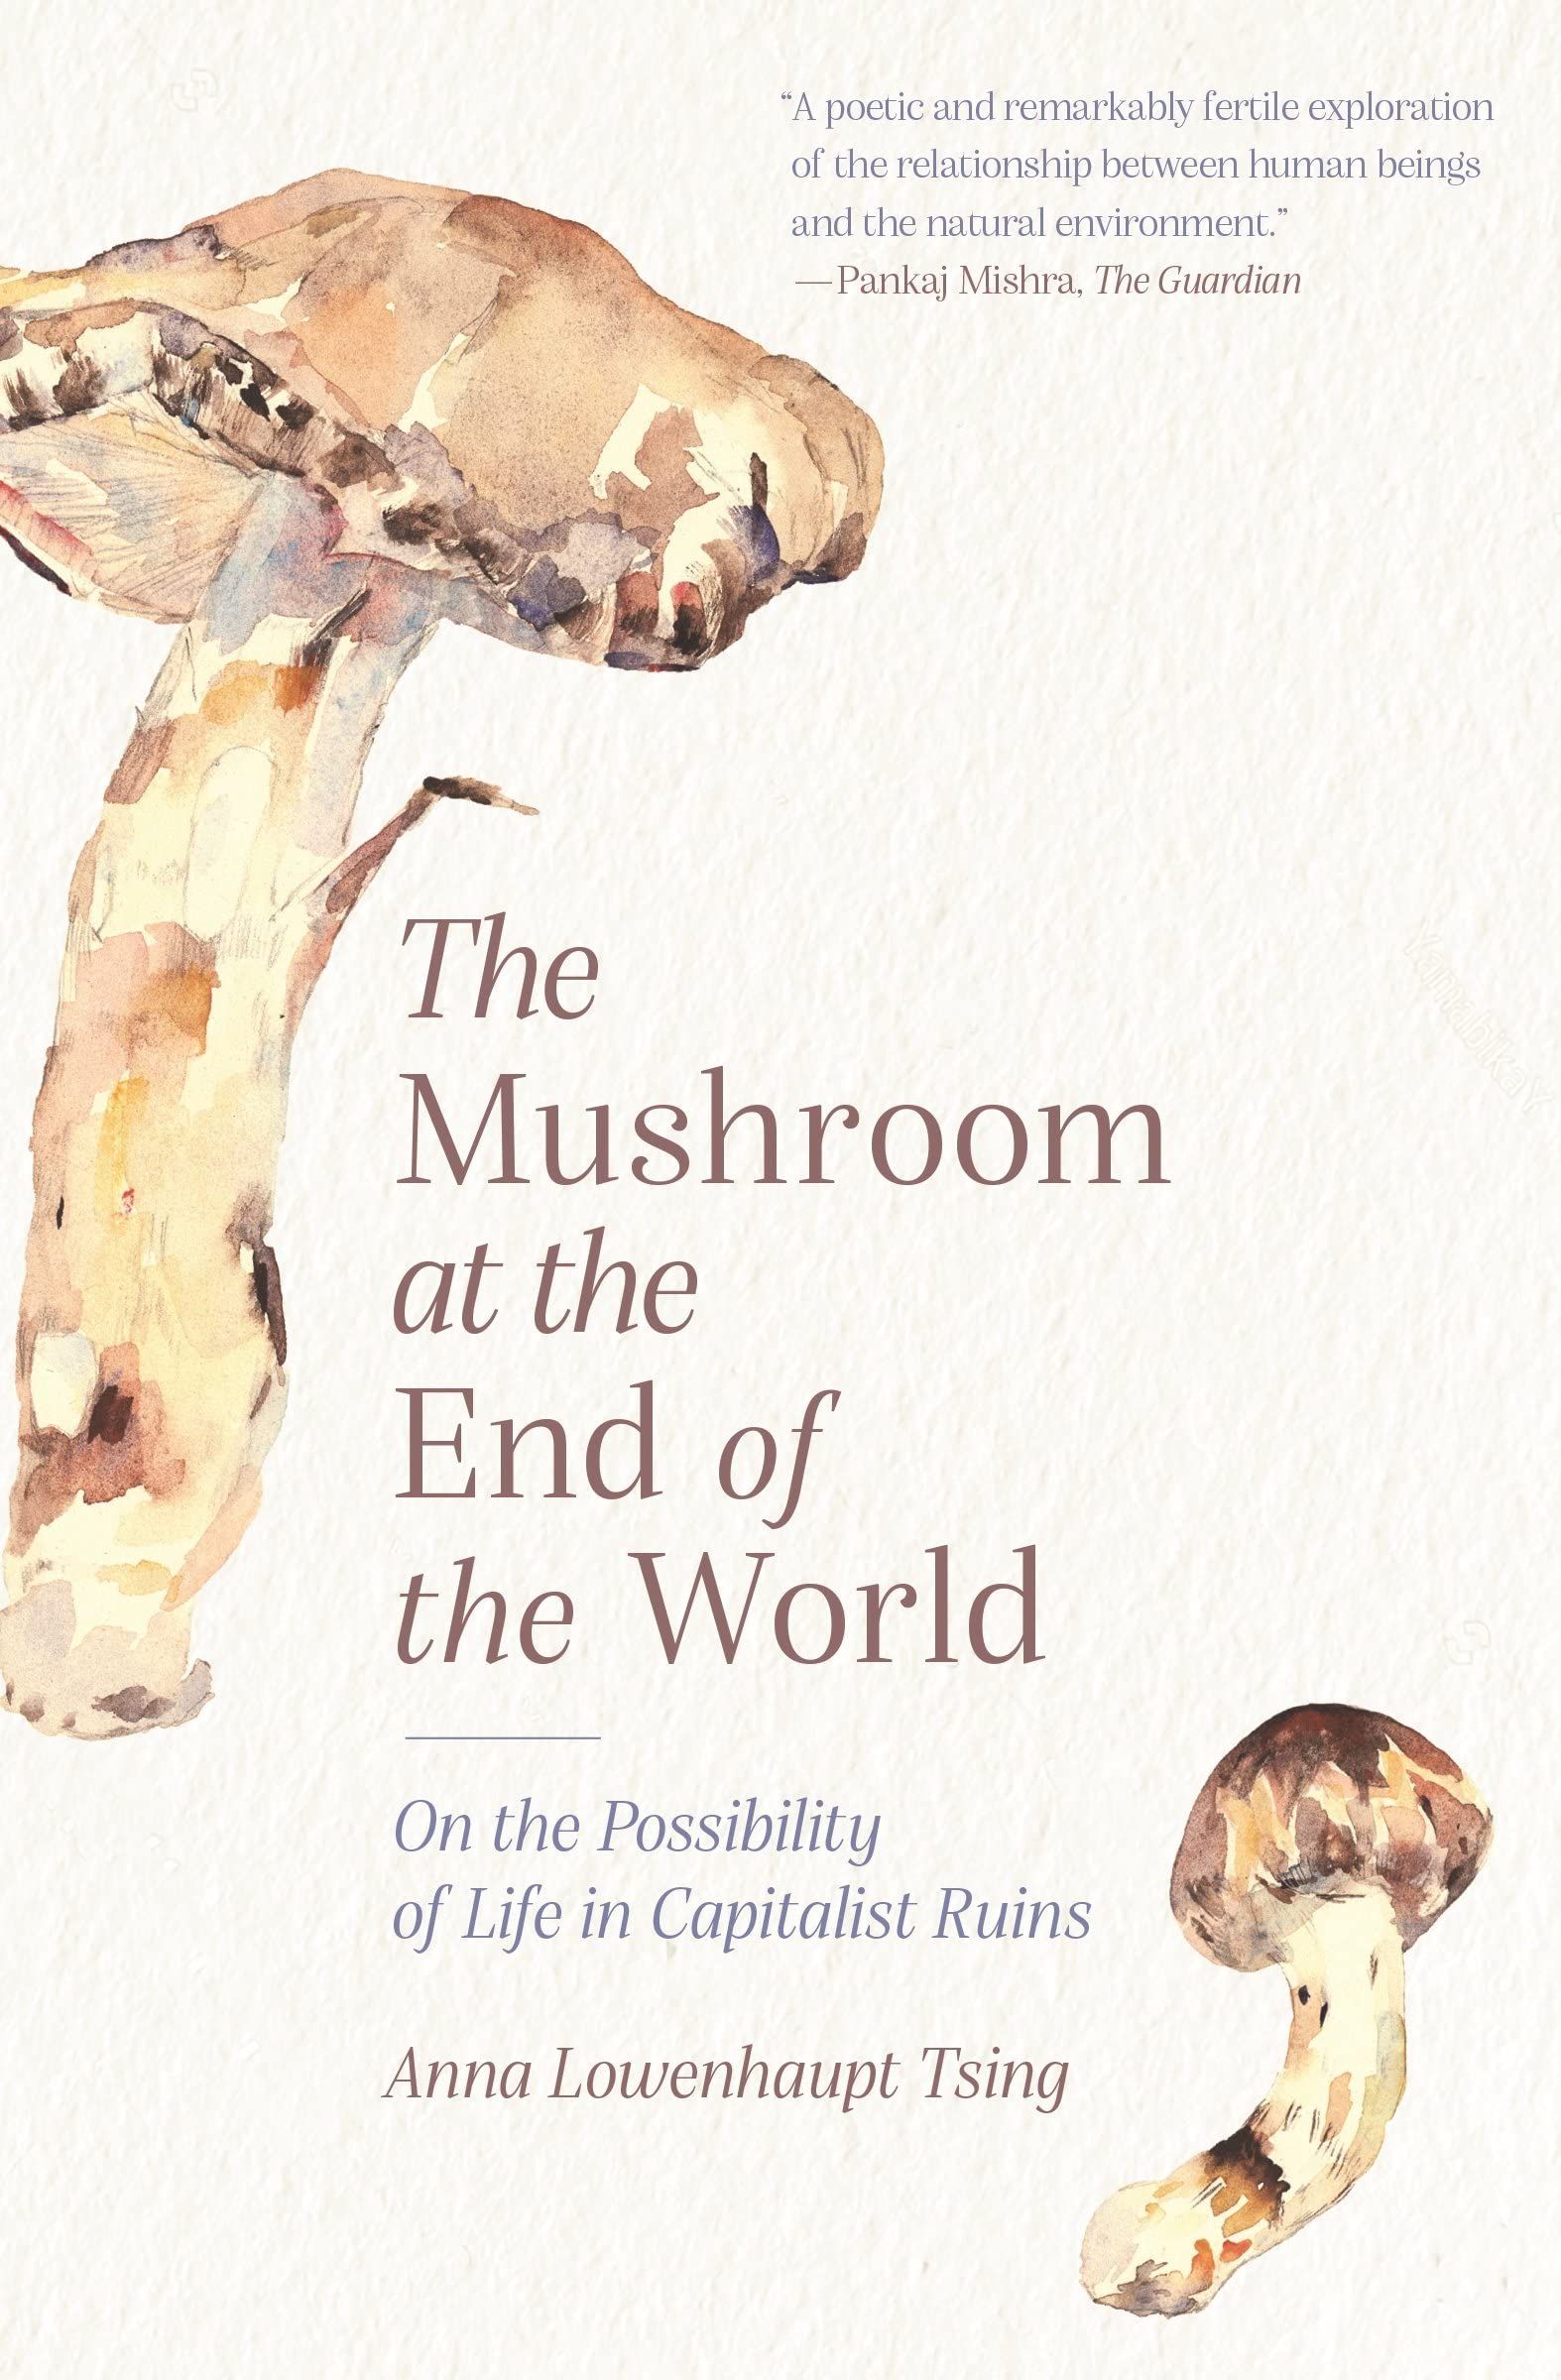 The Mushroom at the end of the World book cover